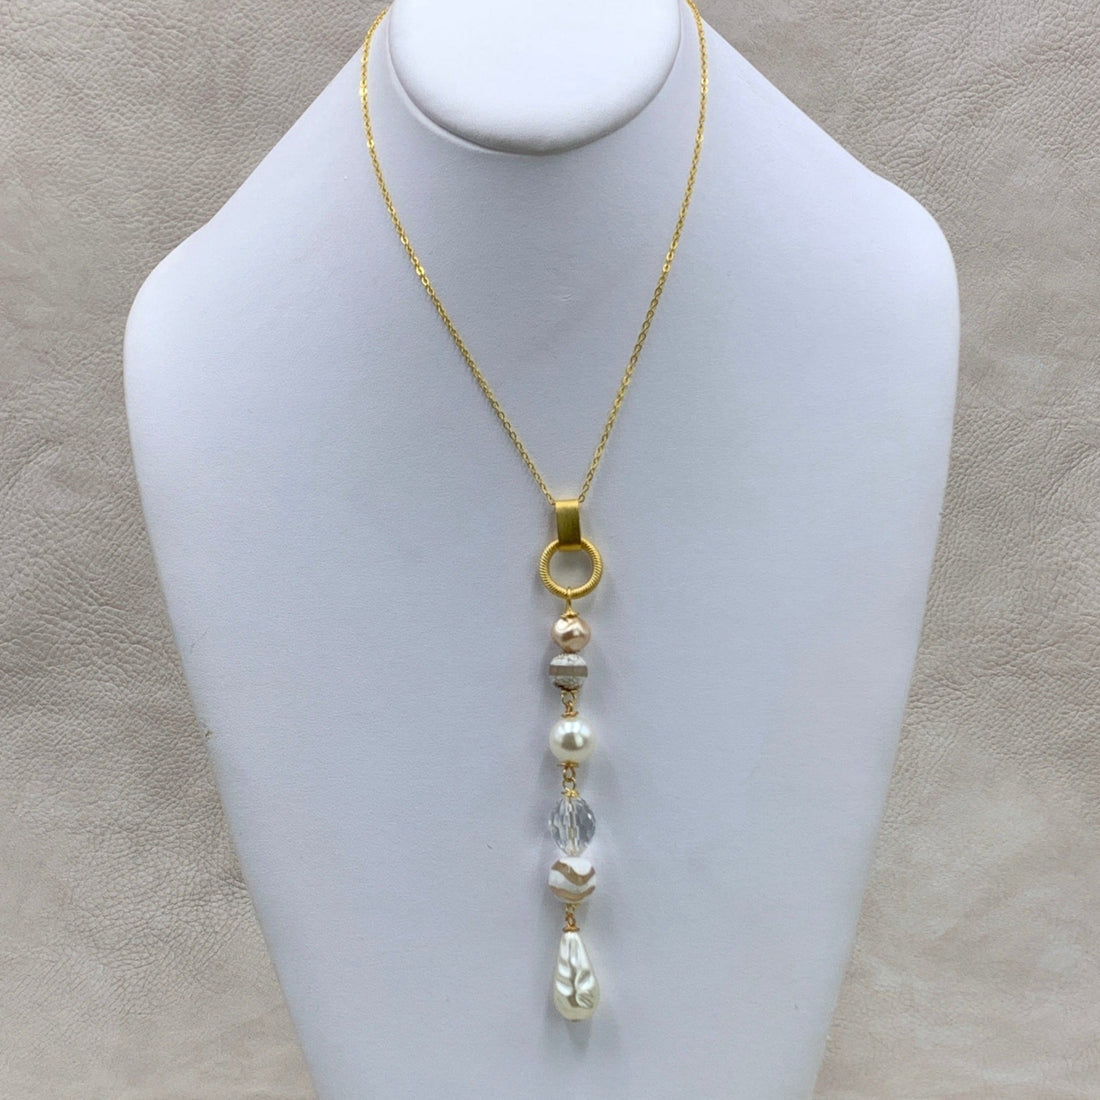 Magnolia Collection Pearl and Agate Chandelier Pendant Necklace